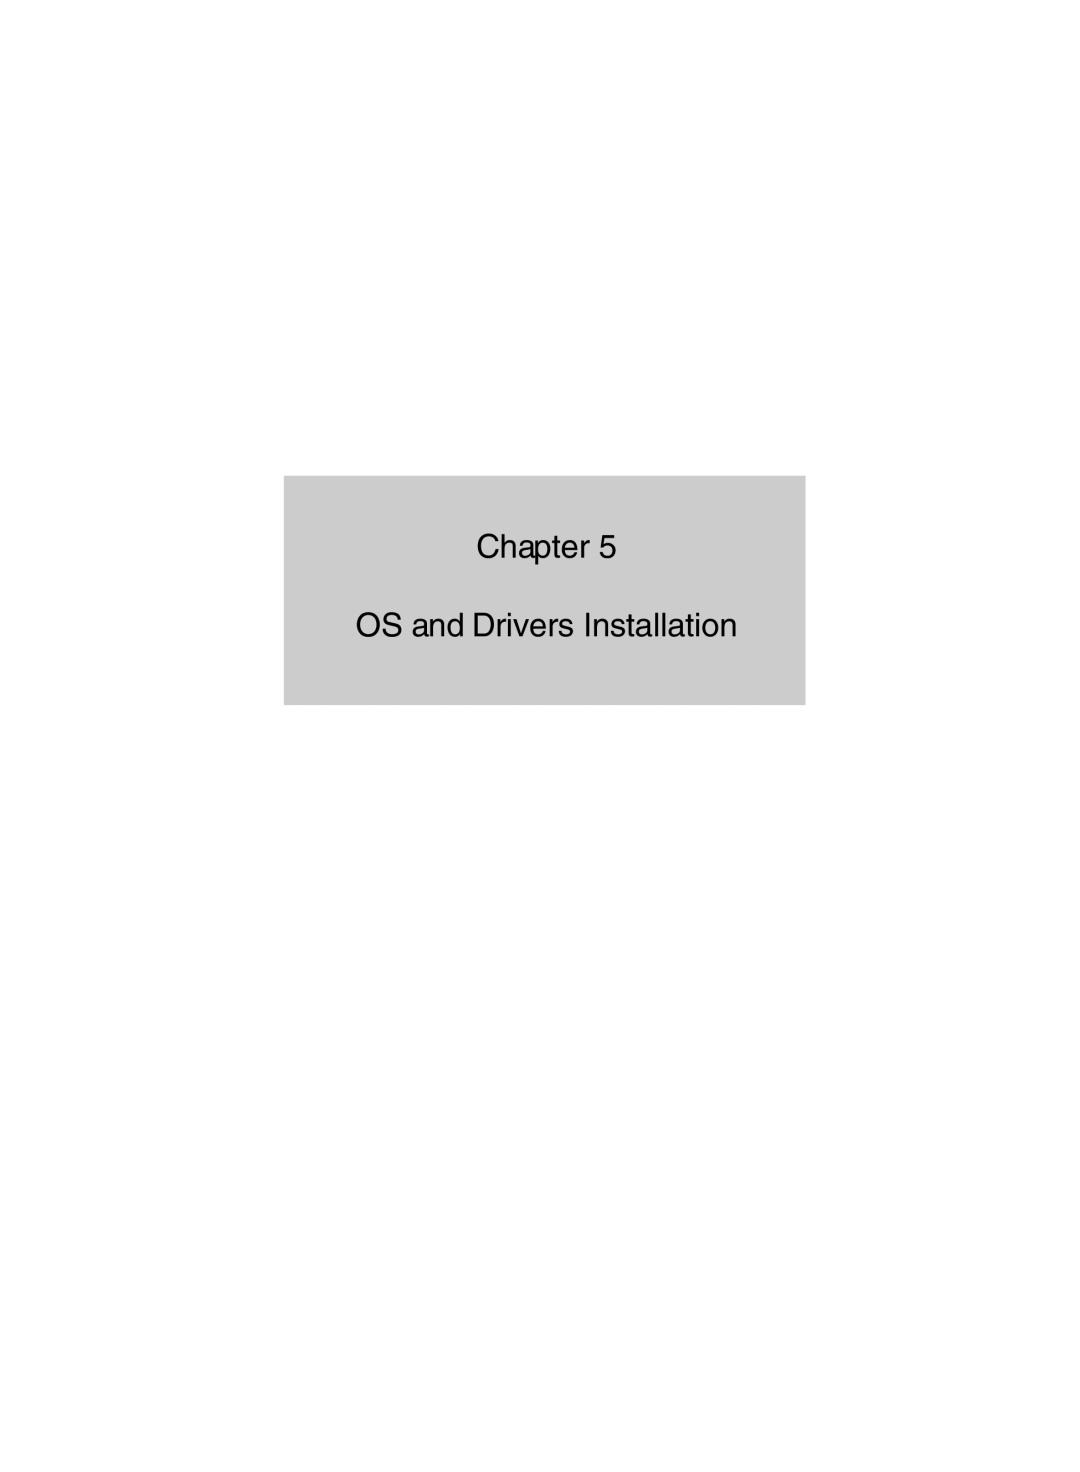 IBM DJ800 user manual Chapter OS and Drivers Installation 